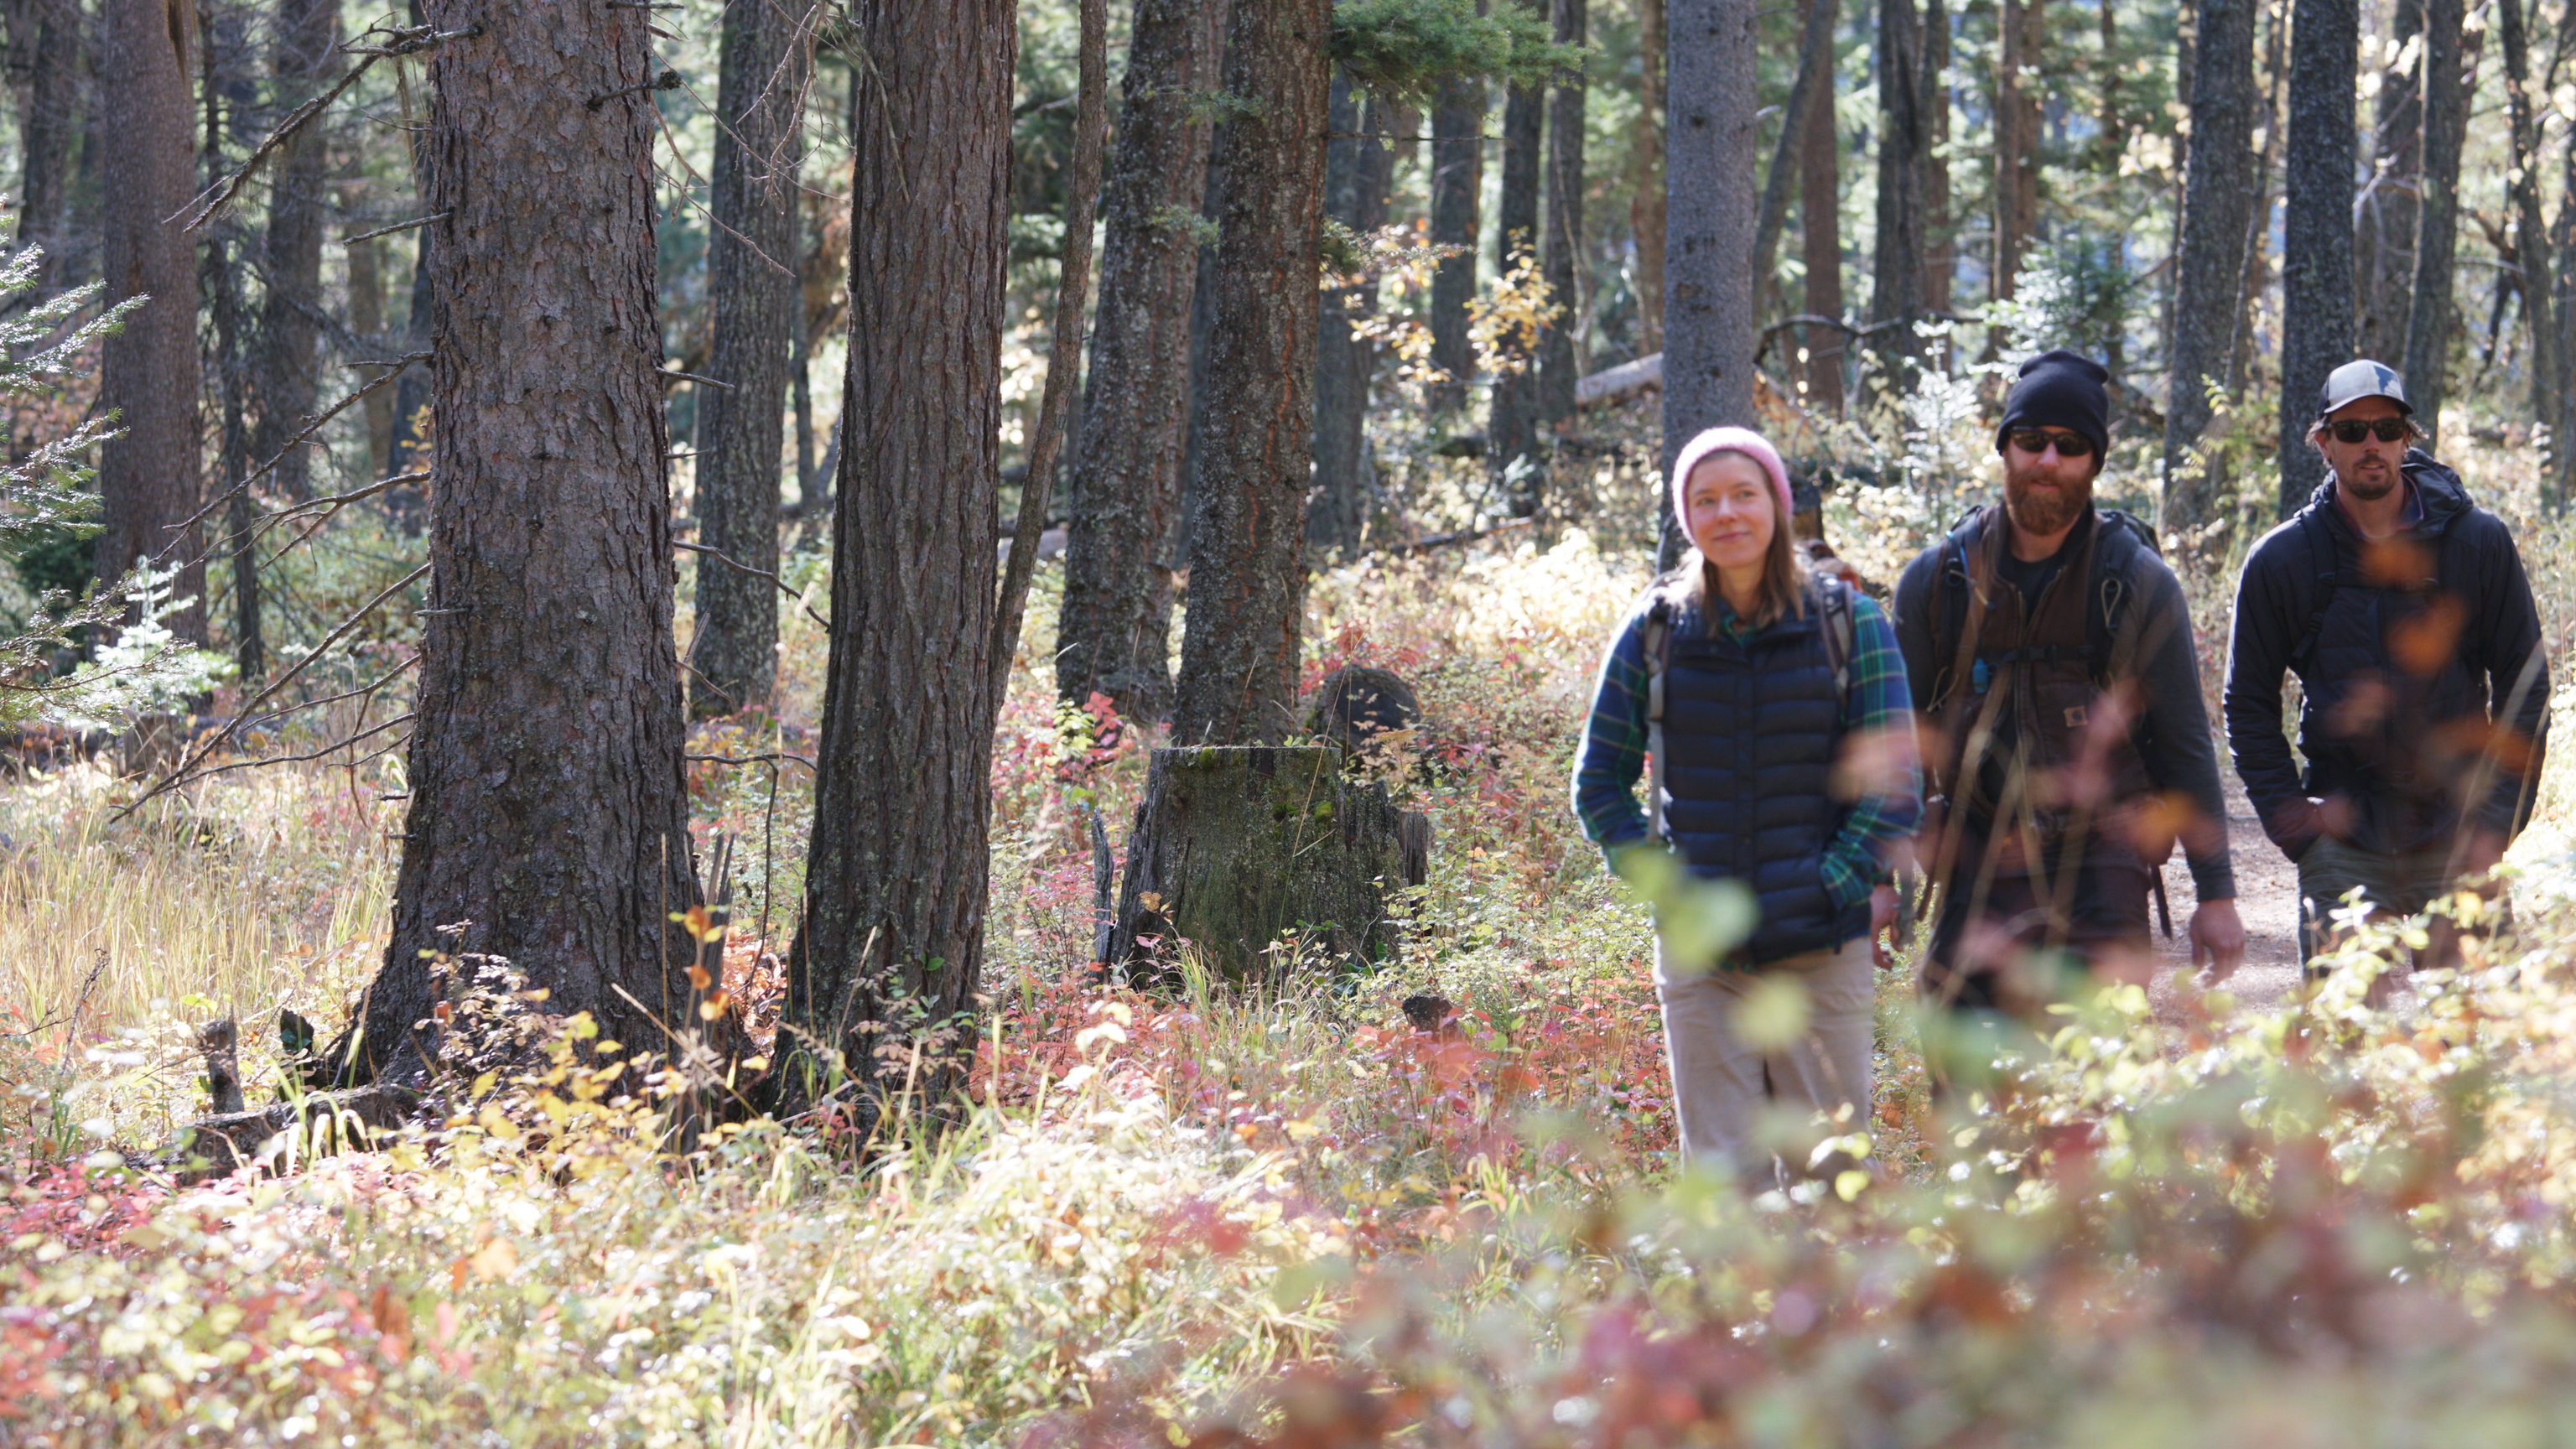 Three people in vests, flannel and jackets hike through a conifer forest surrounded by fall-colored bushes.